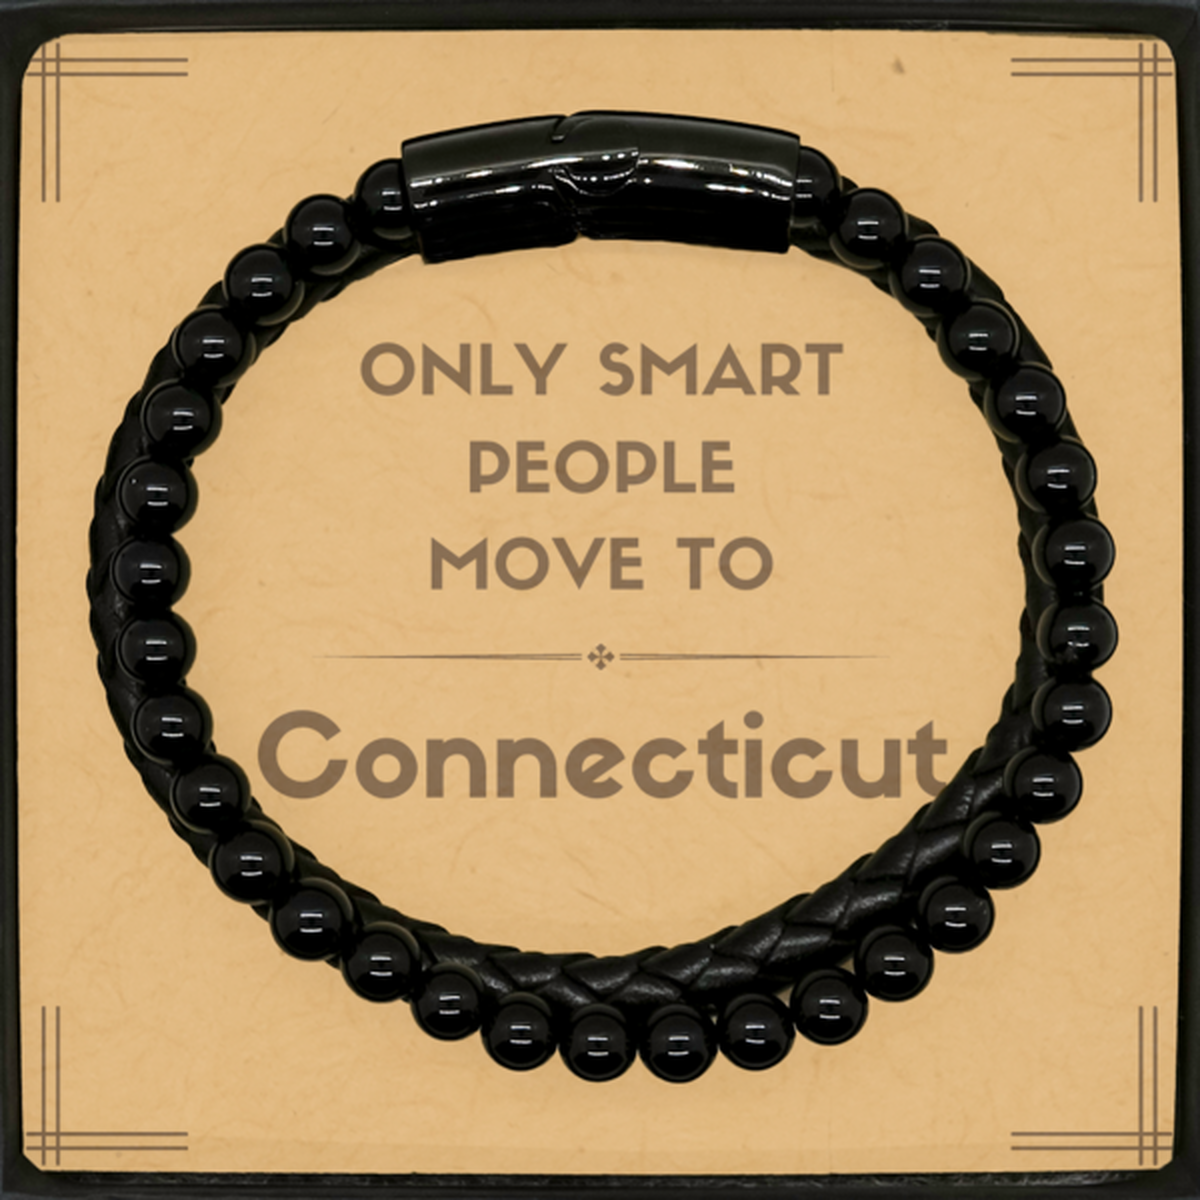 Only smart people move to Connecticut Stone Leather Bracelets, Message Card Gifts For Connecticut, Move to Connecticut Gifts for Friends Coworker Funny Saying Quote